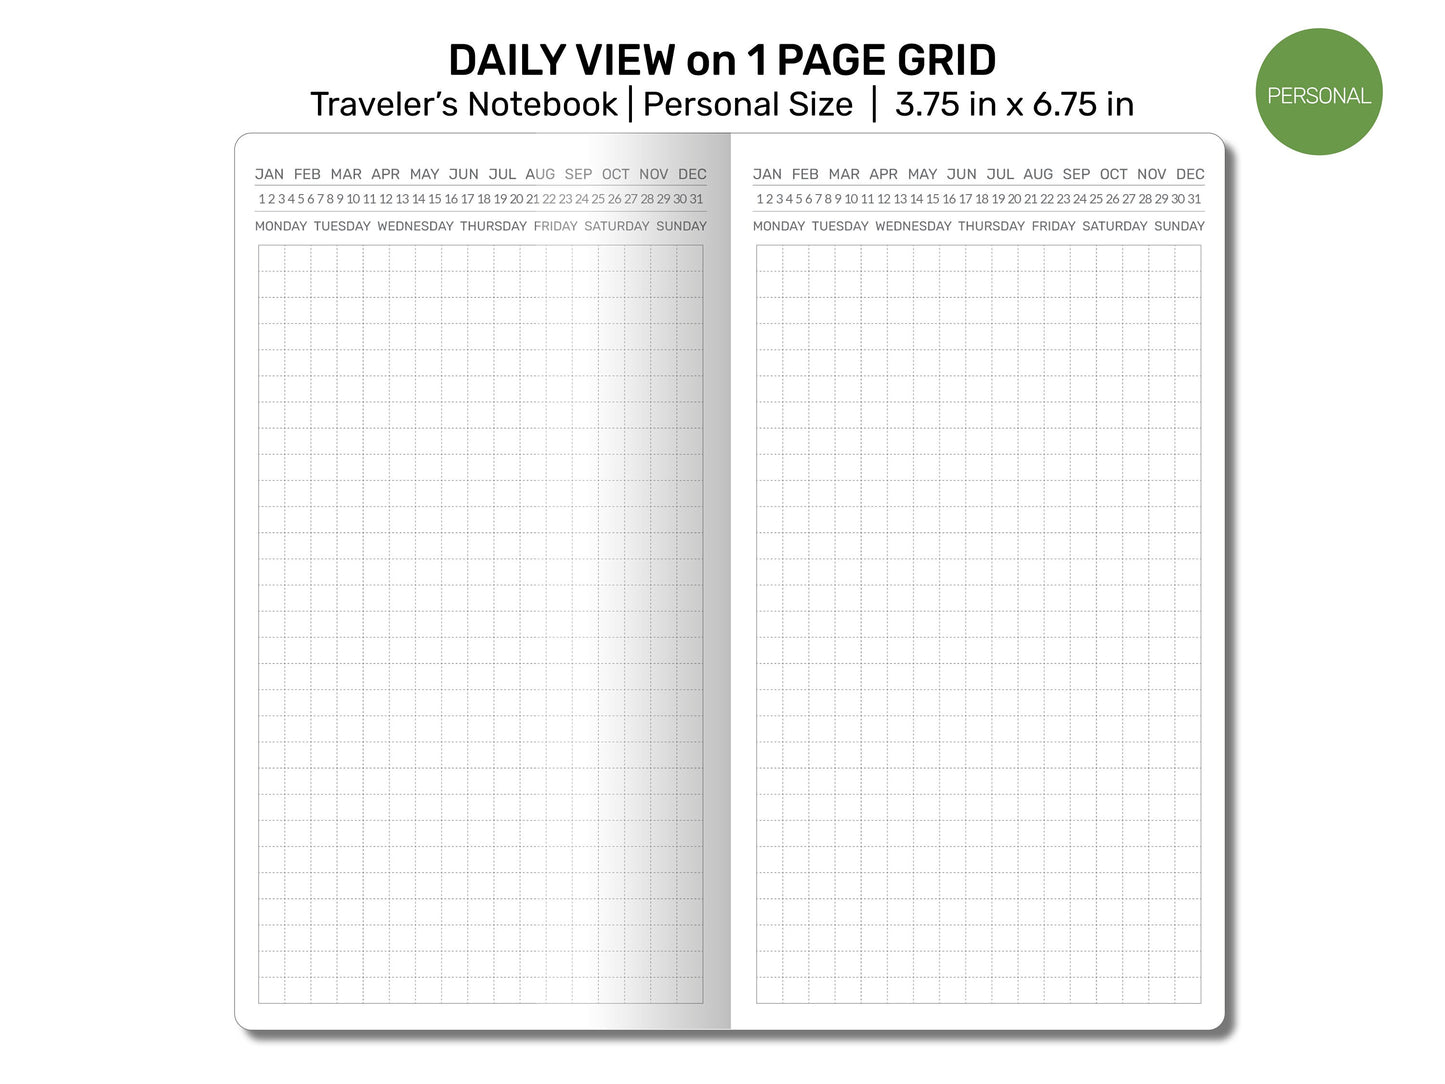 Daily View GRID - Personal Size - Traveler's Notebook - Printable Planner - Do1P Minimalist Functional PER004